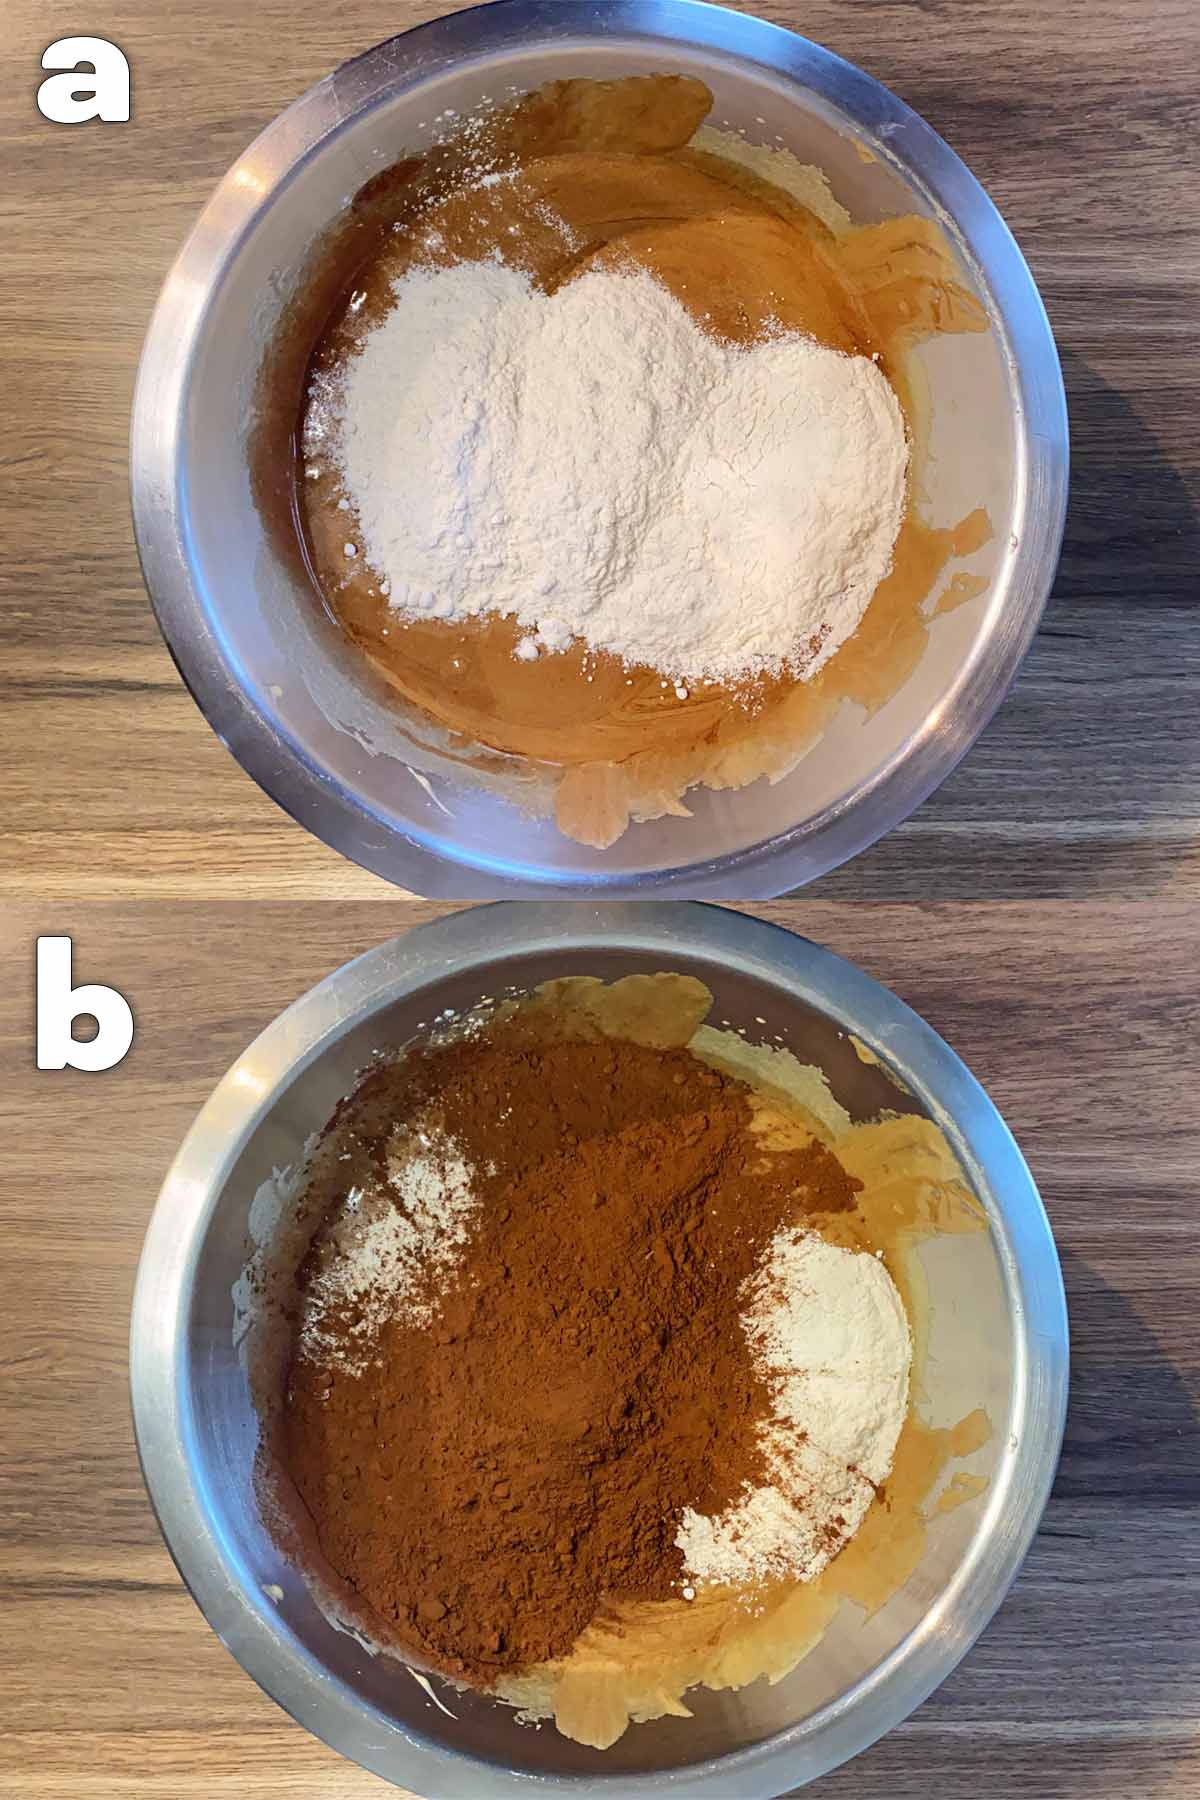 Two shot collage of flour and cocoa added to the batter, before and after mixing together.